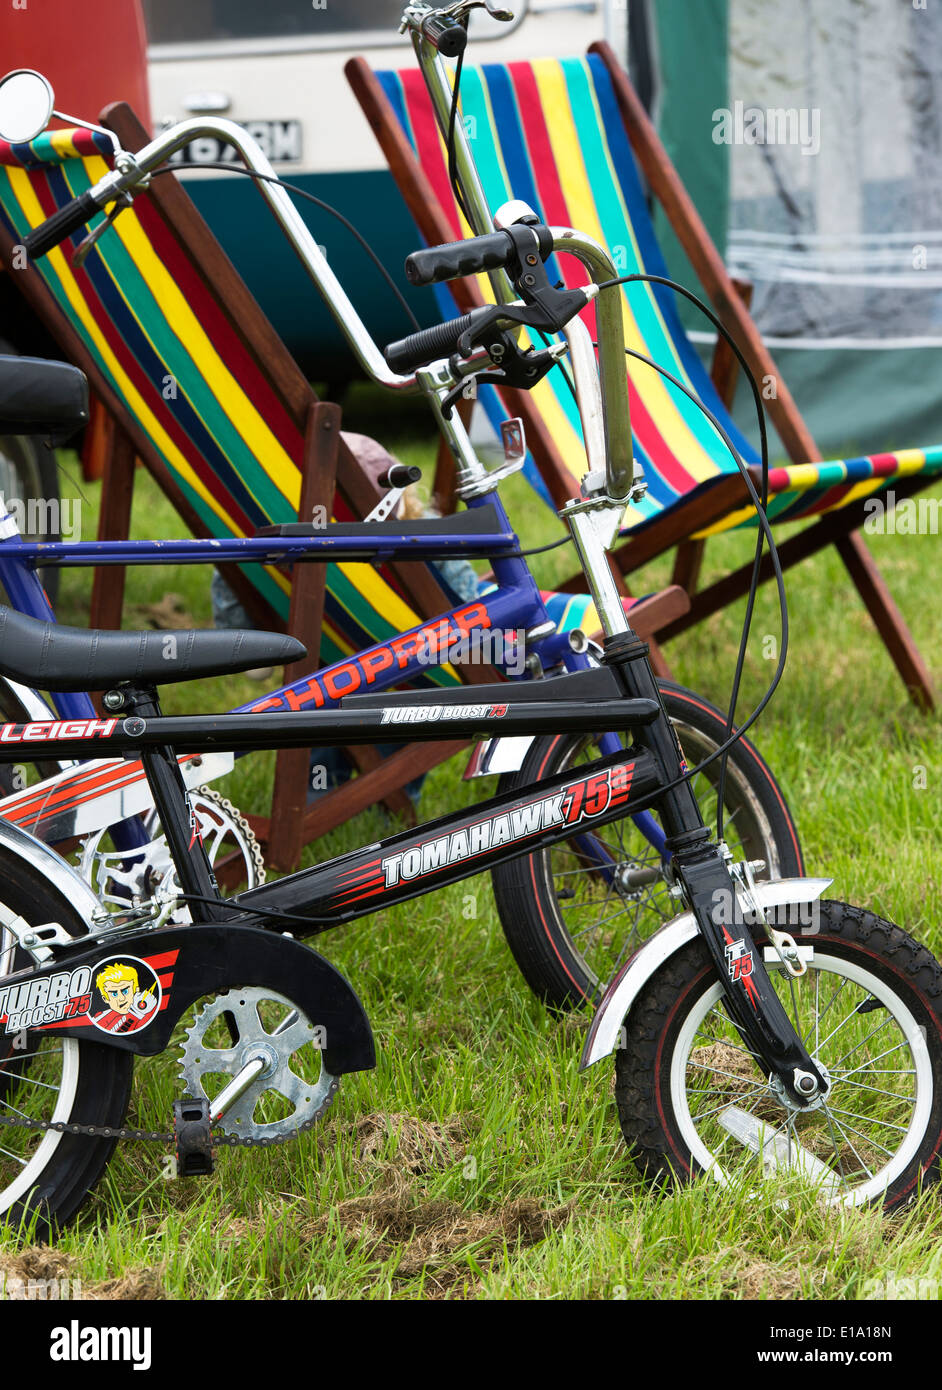 Raleigh Chopper and tomahawk bikes in front of deck chairs Stock Photo